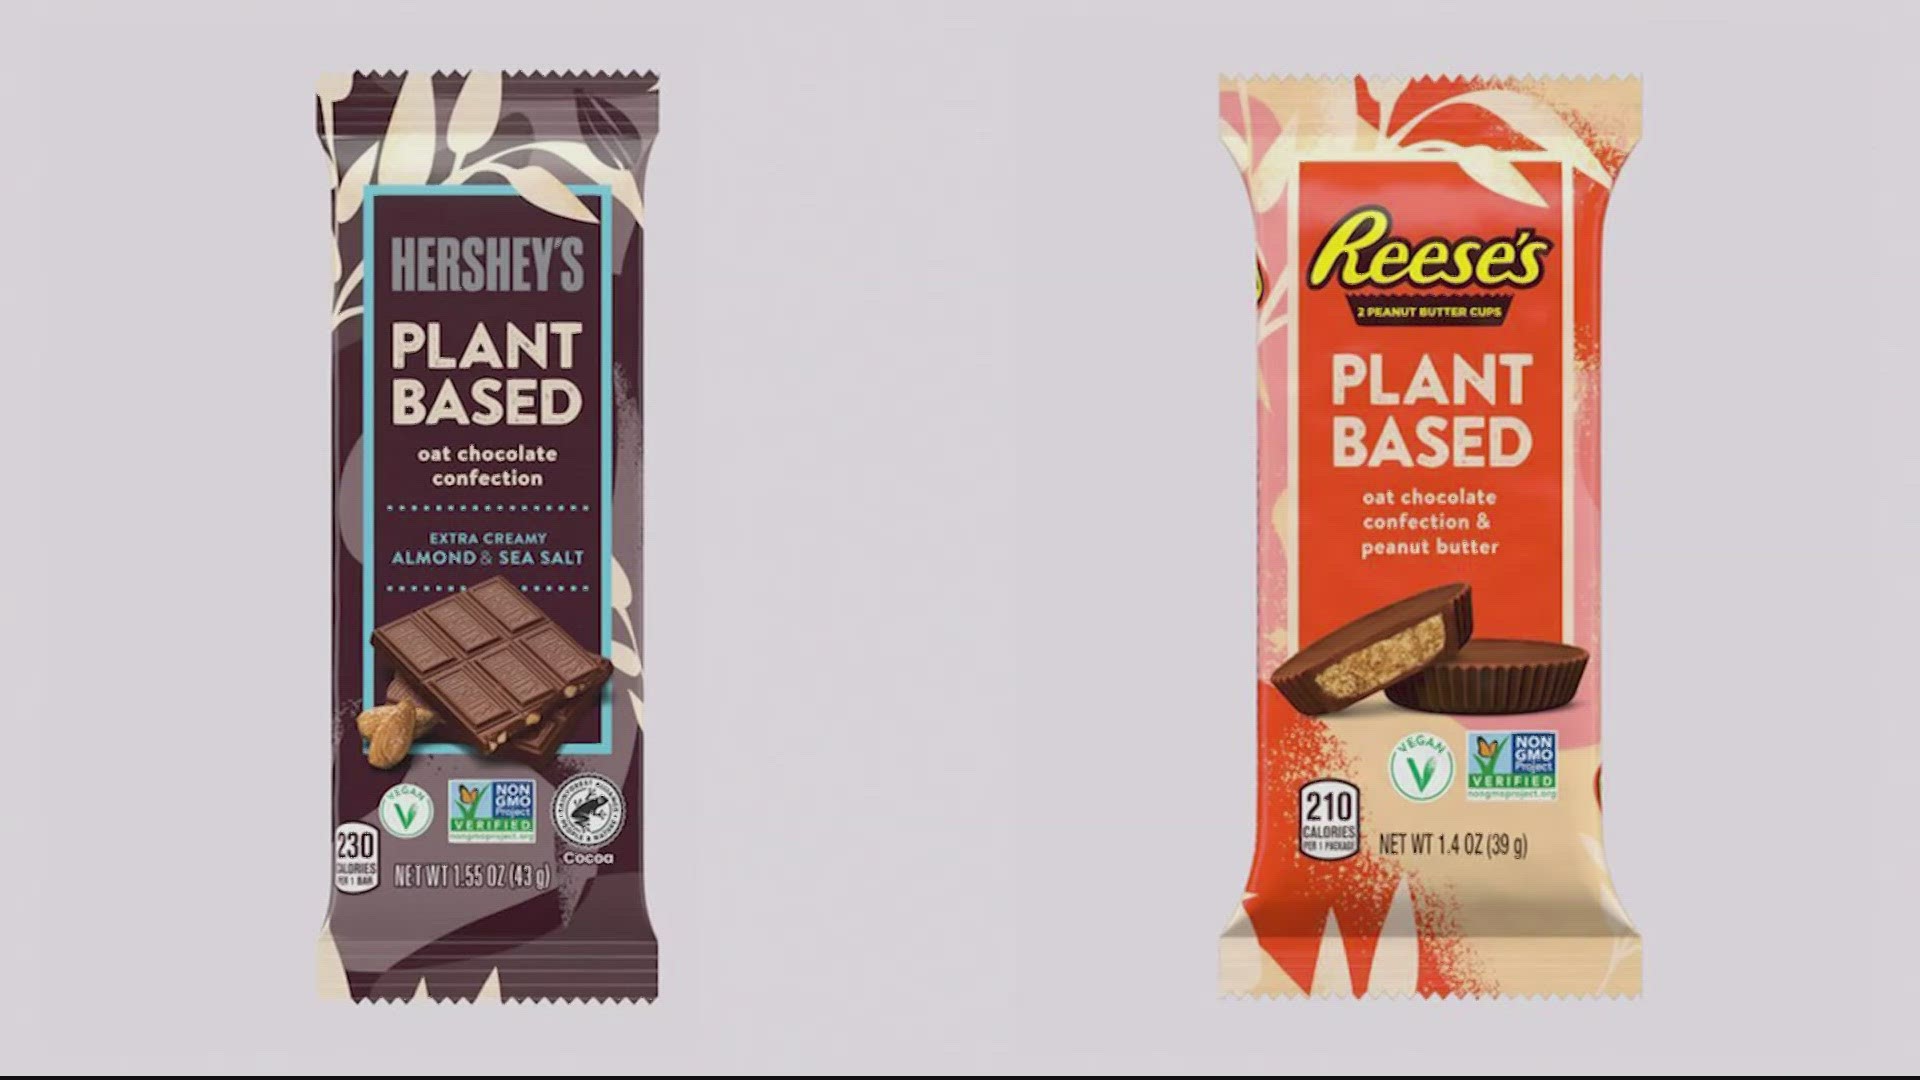 Hershey, which makes Reese’s along with Hershey bars, Kisses, and other chocolates and candies, announced two new dairy-free products on Tuesday.